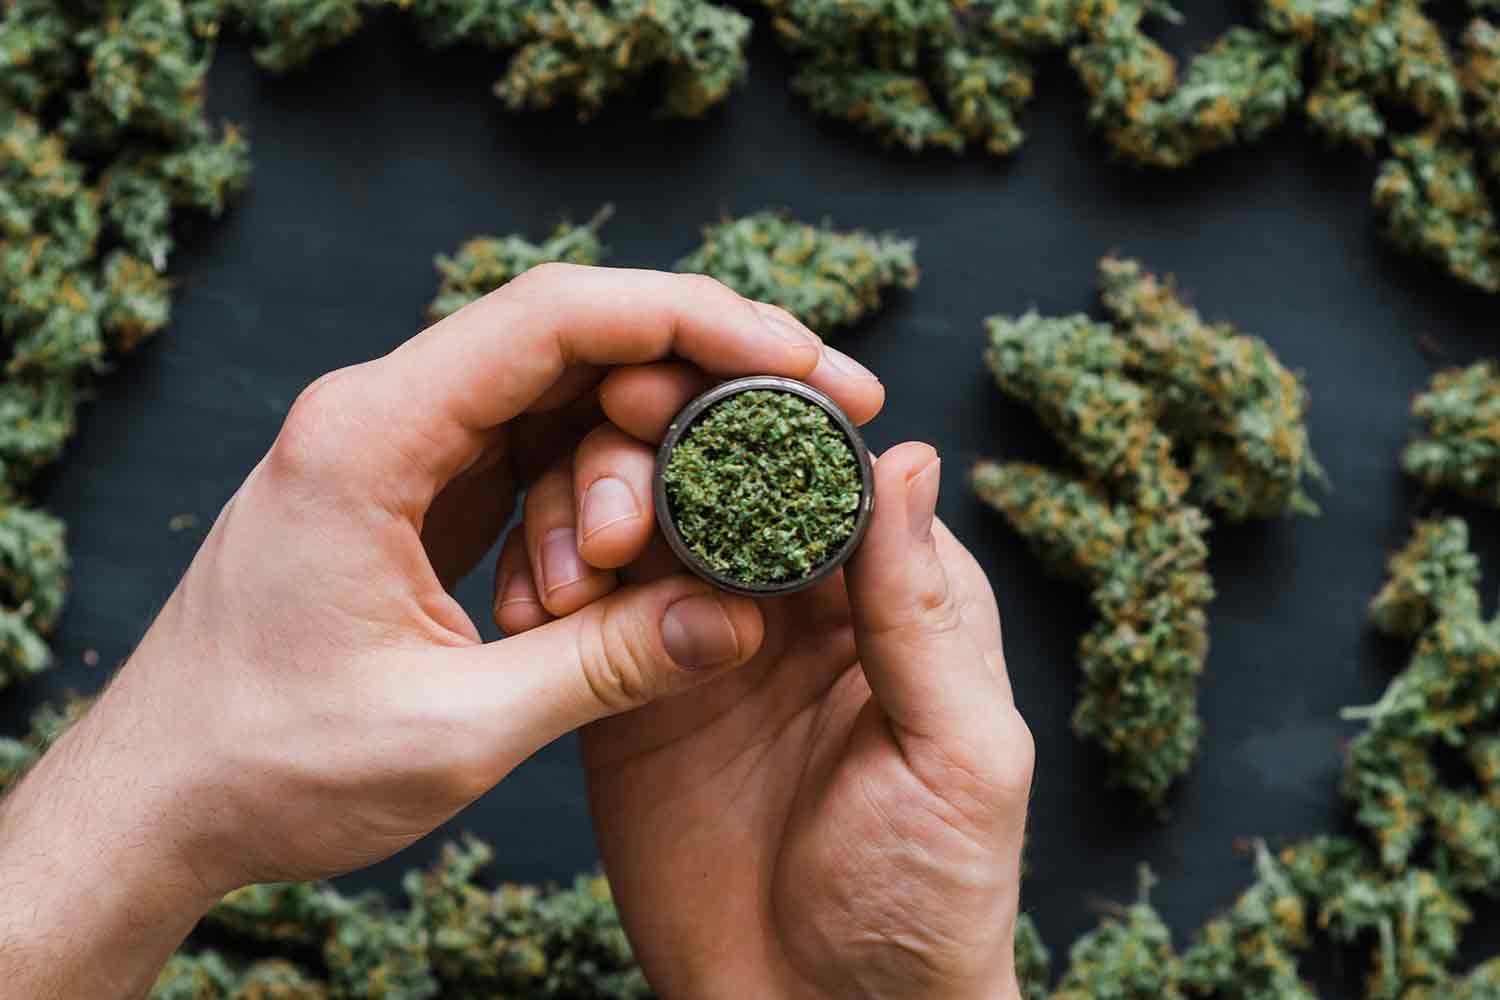 How Mail Order Marijuana is Changing the Cannabis Industry Landscape